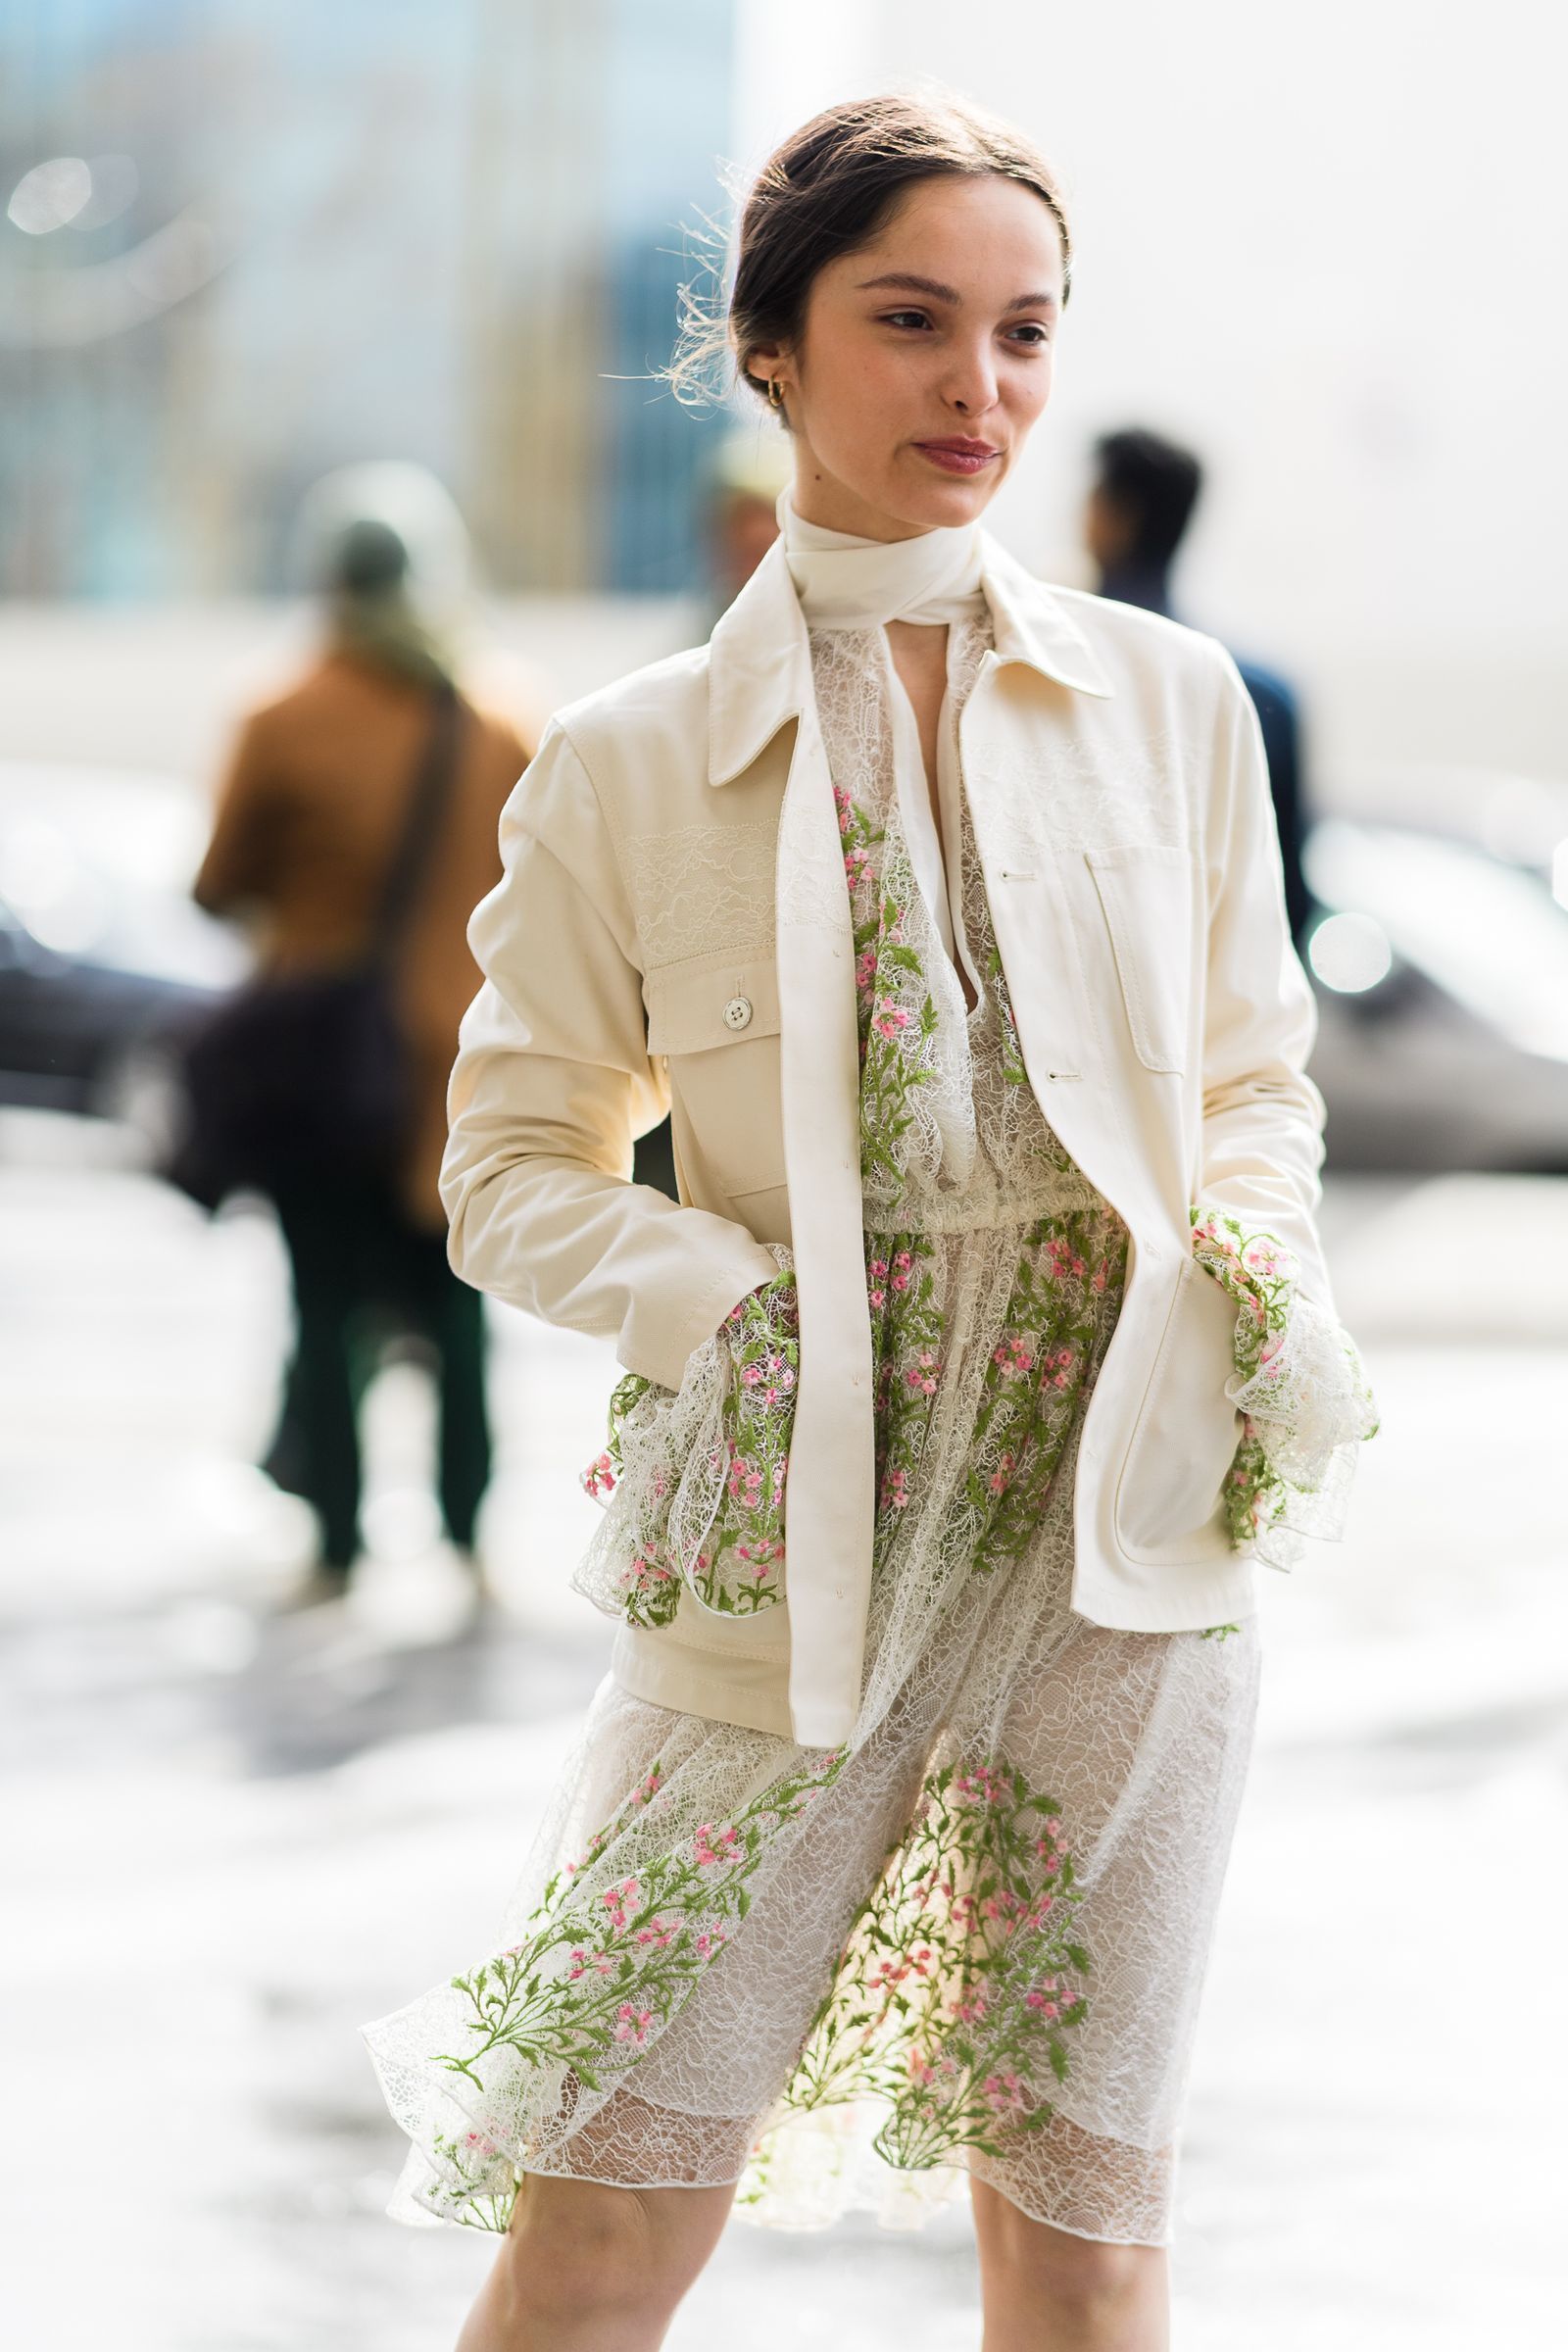 Pin These Street Style Outfits from Paris Fashion Week to Your Mood Board - Pin These Street Style Outfits from Paris Fashion Week to Your Mood Board -   19 style Romantic street ideas